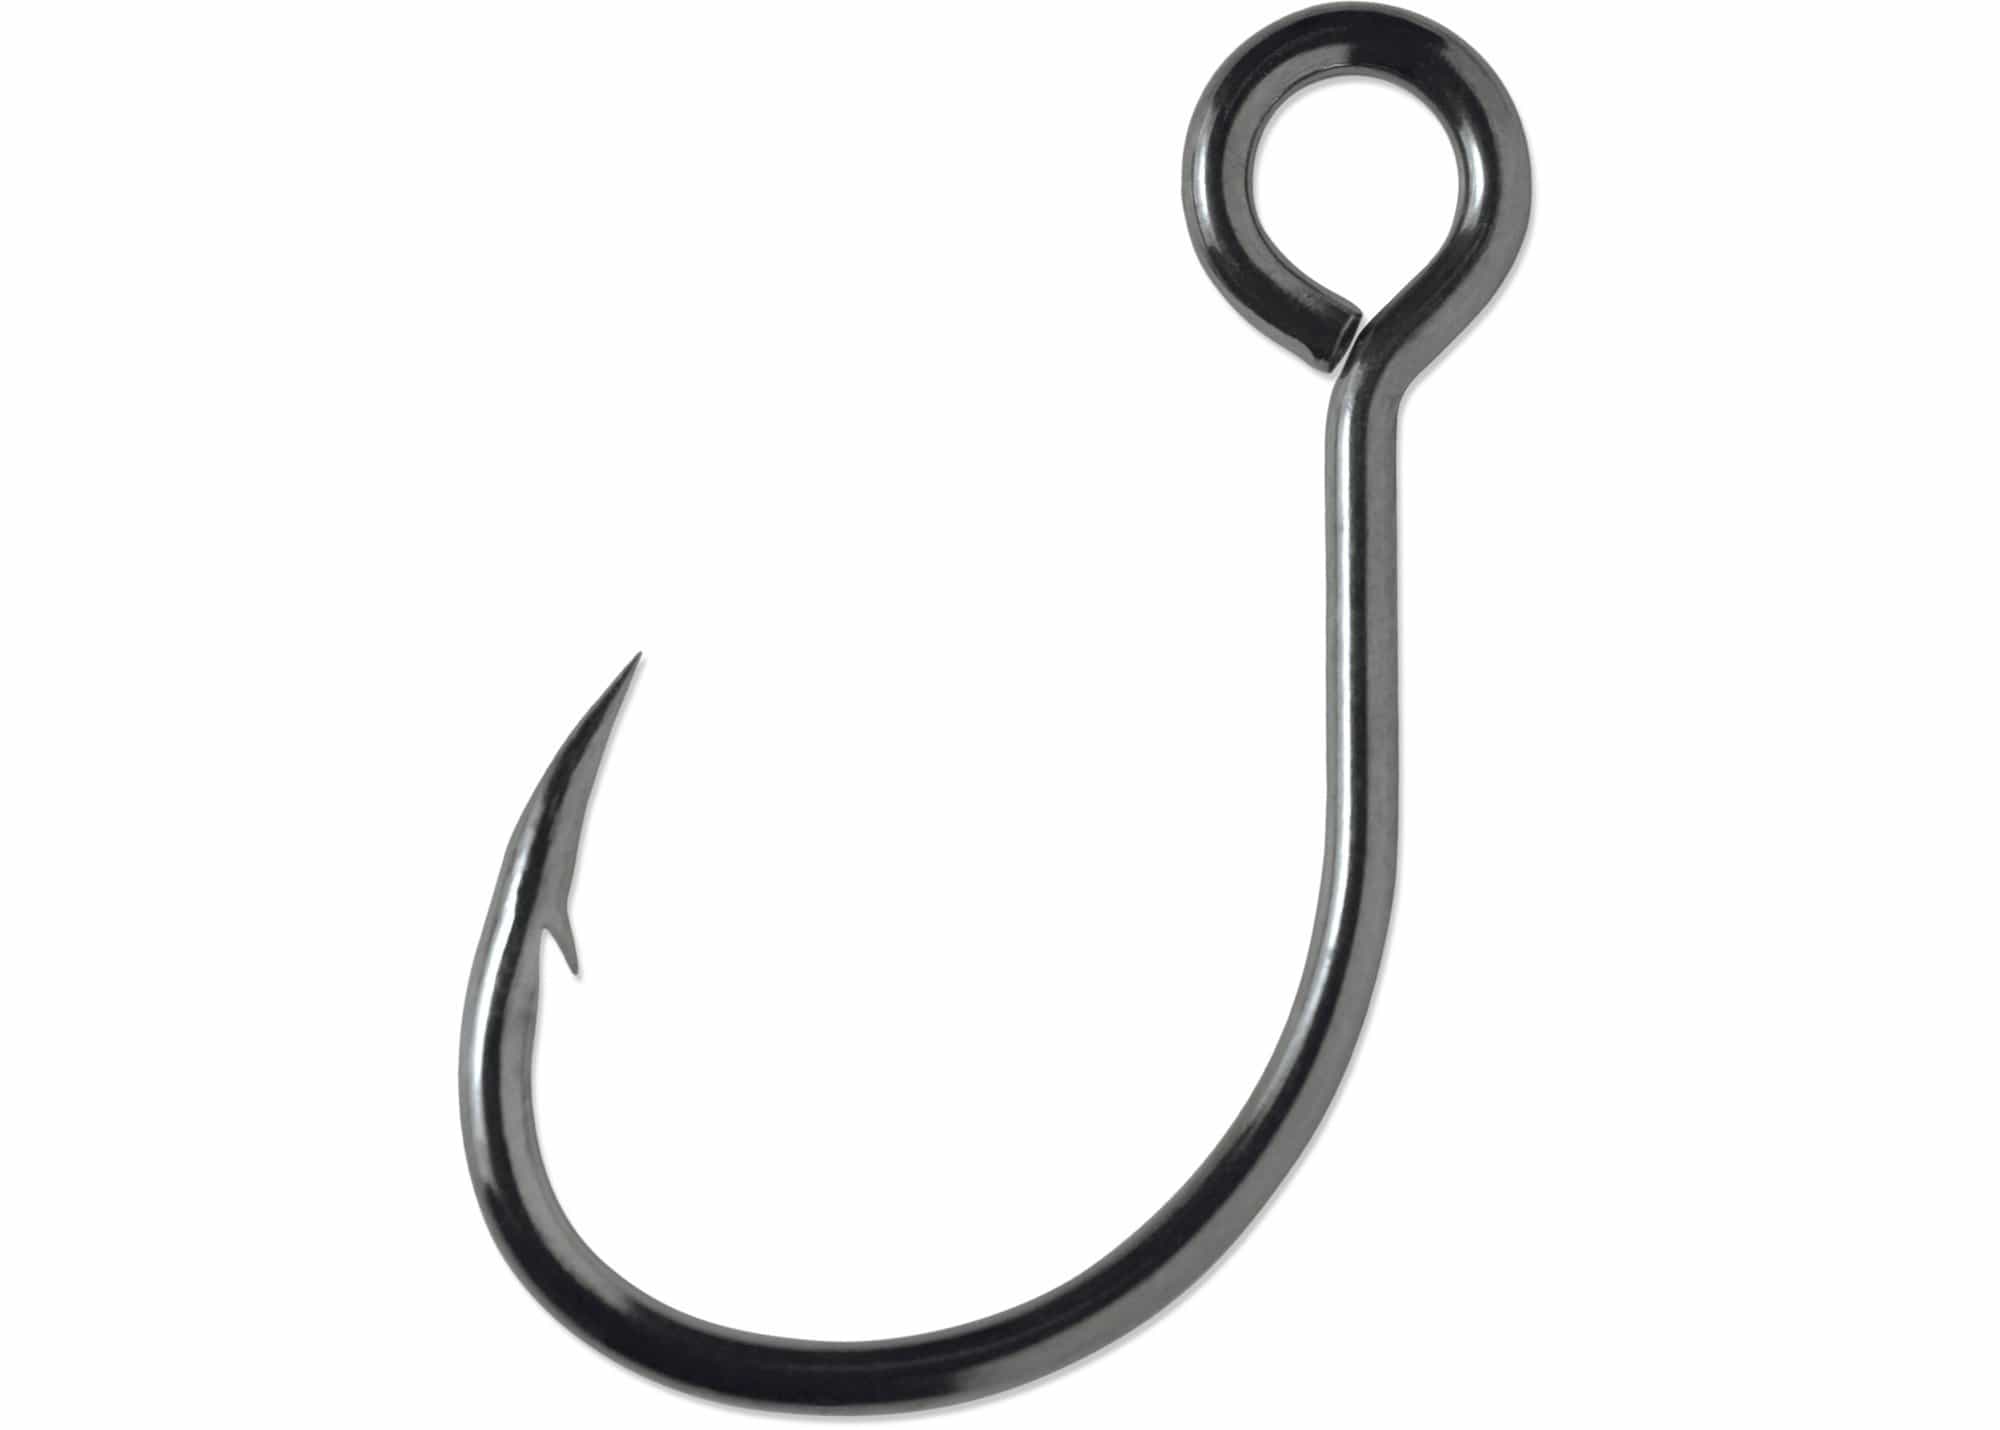  KTGCOZS Pack of 30 Inline Fishing Hooks for Lures